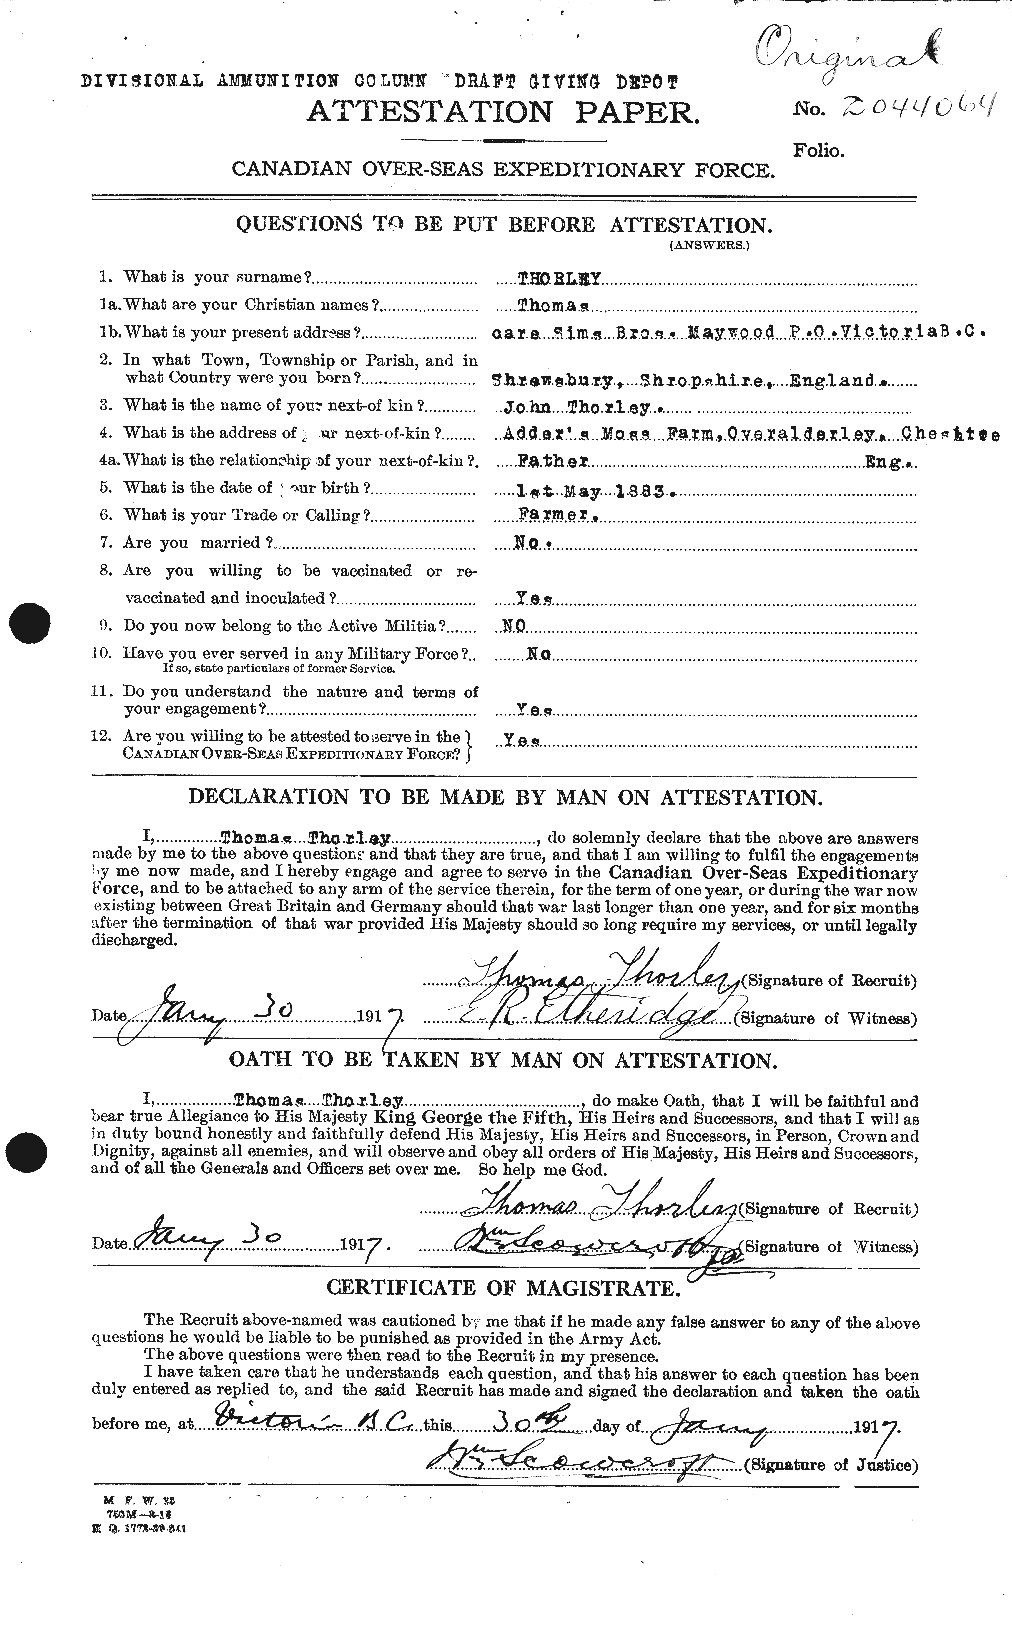 Personnel Records of the First World War - CEF 635795a